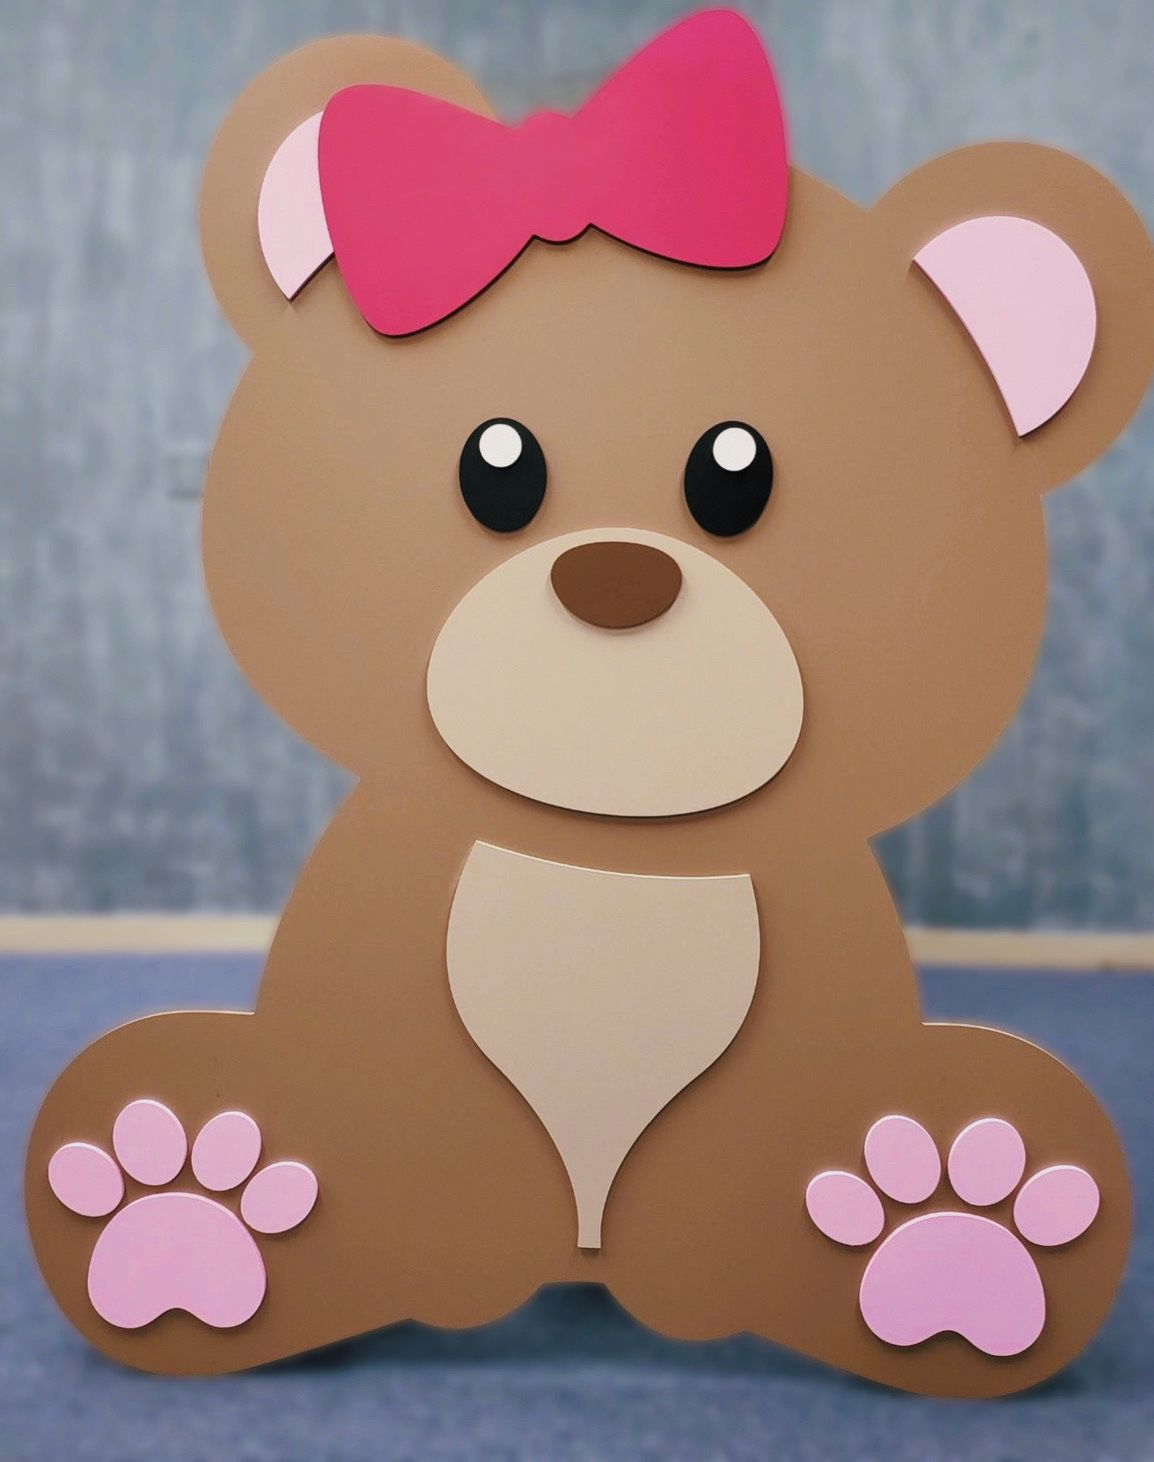 Teddy Bear Props For Baby Shower, Gender Reveal, Birthday Party